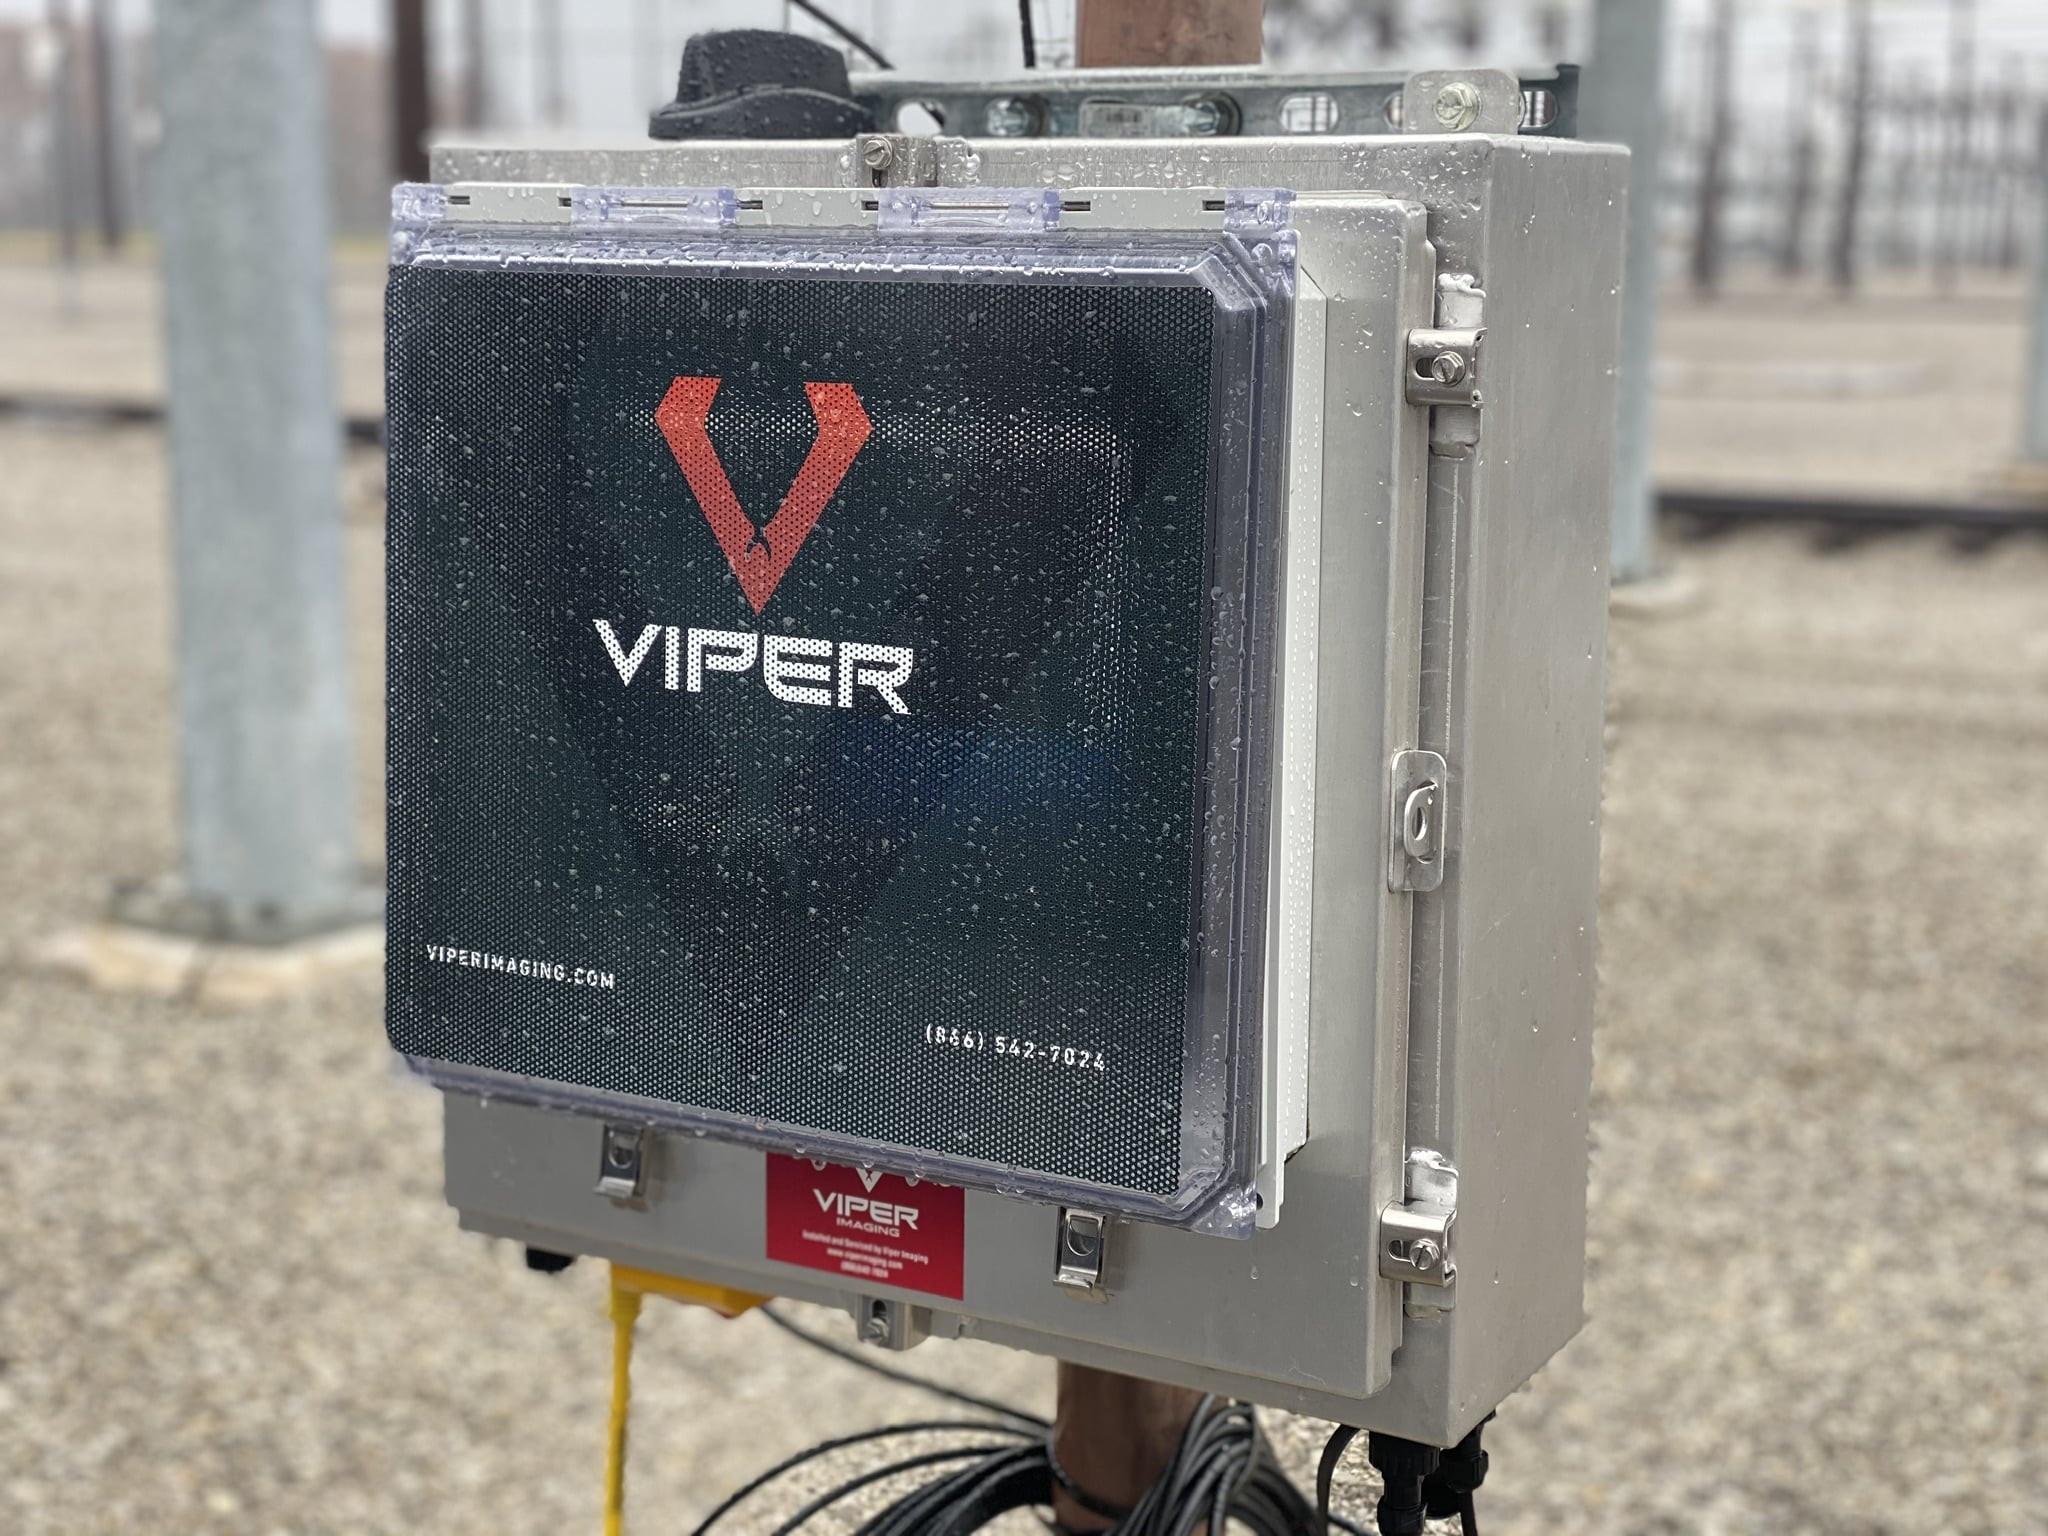 Viper quick deploy system photo